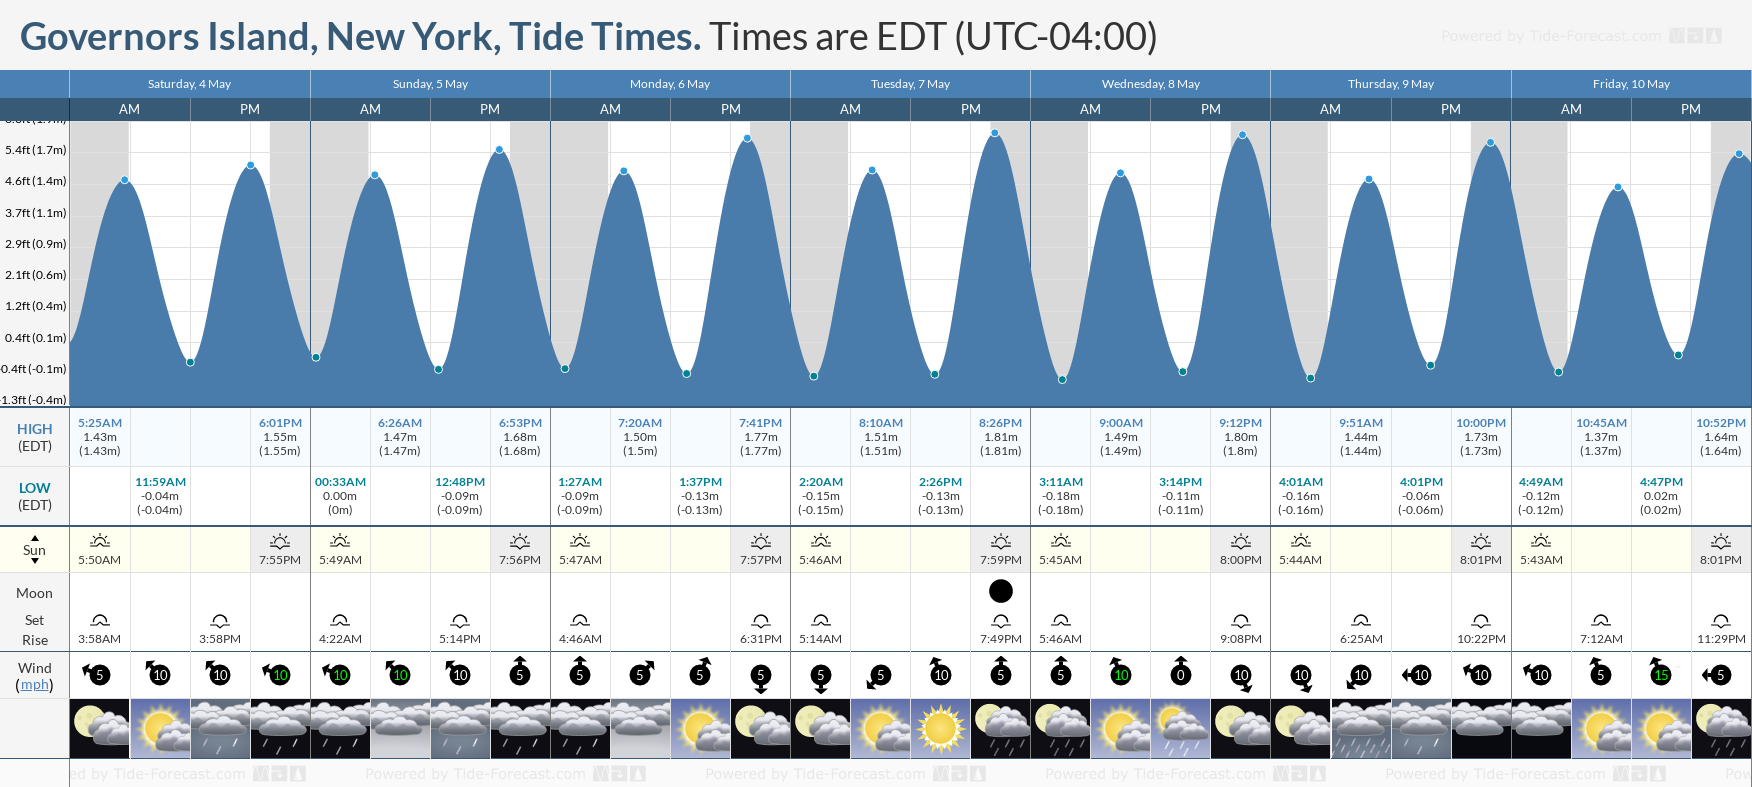 Governors Island, New York Tide Chart including high and low tide tide times for the next 7 days